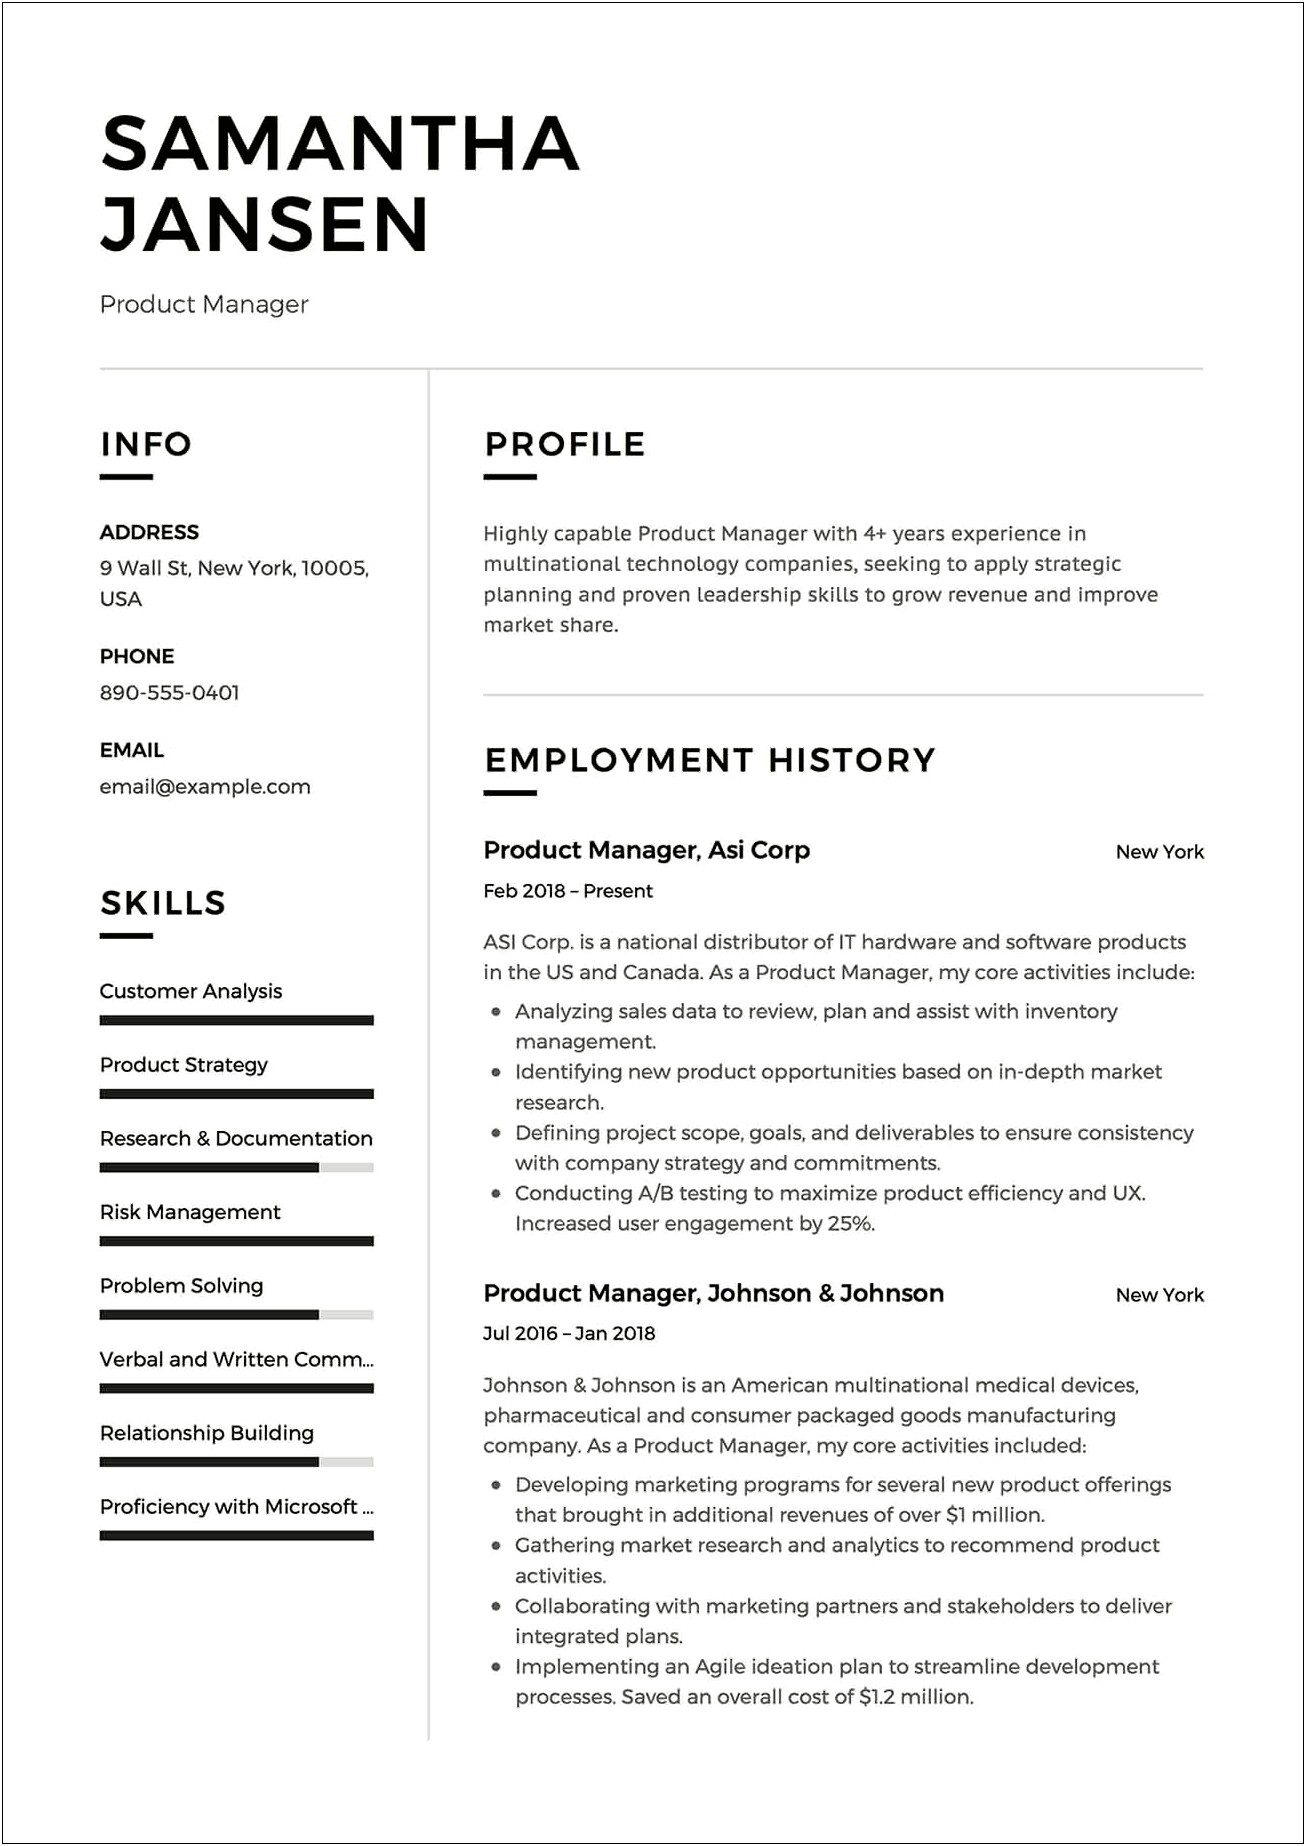 Resume List Experience Start Date Or End Date